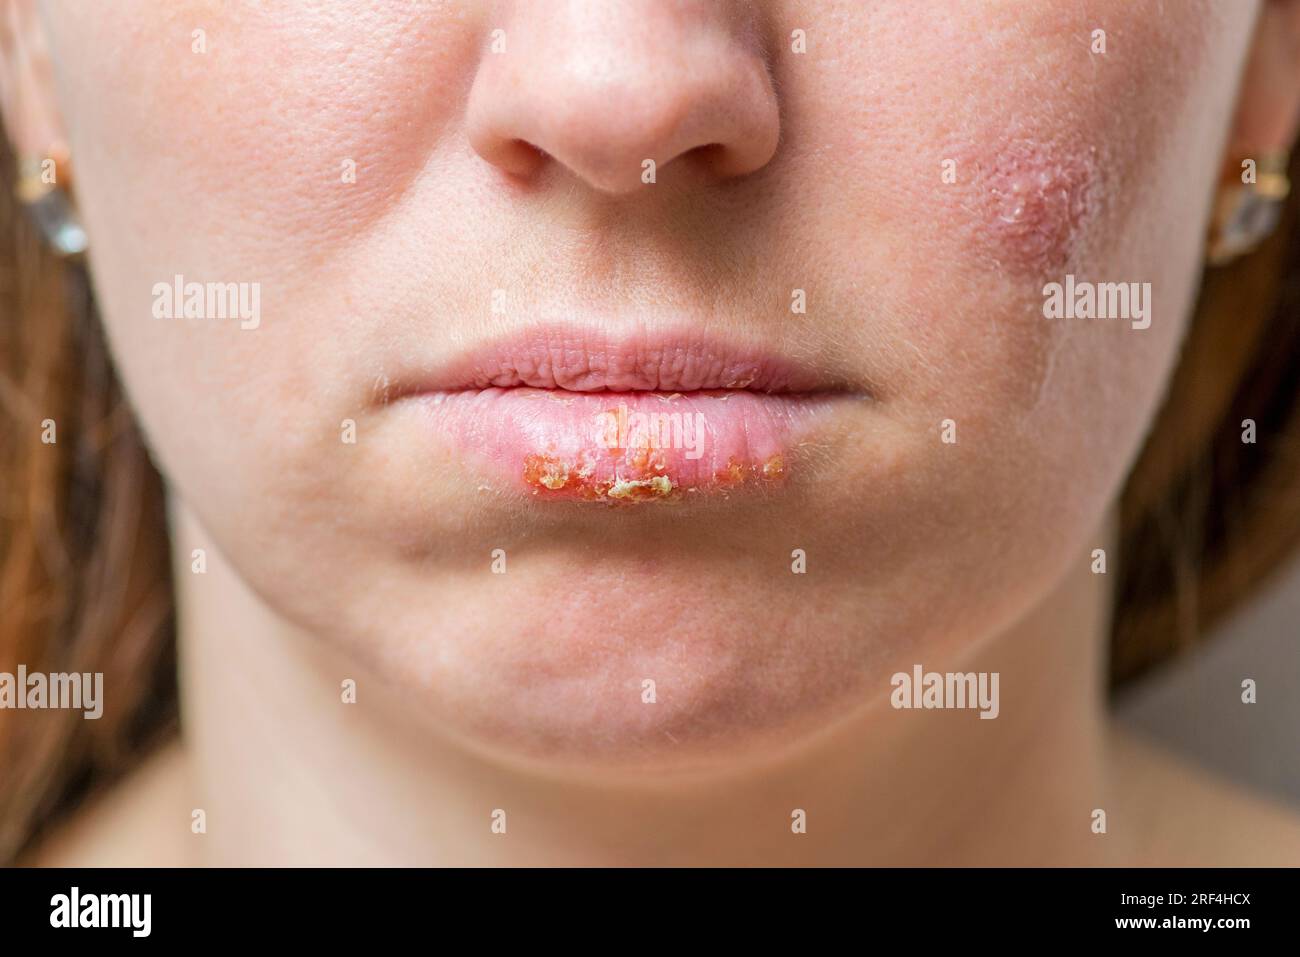 Close up of female lips affected by herpes virus. Stock Photo